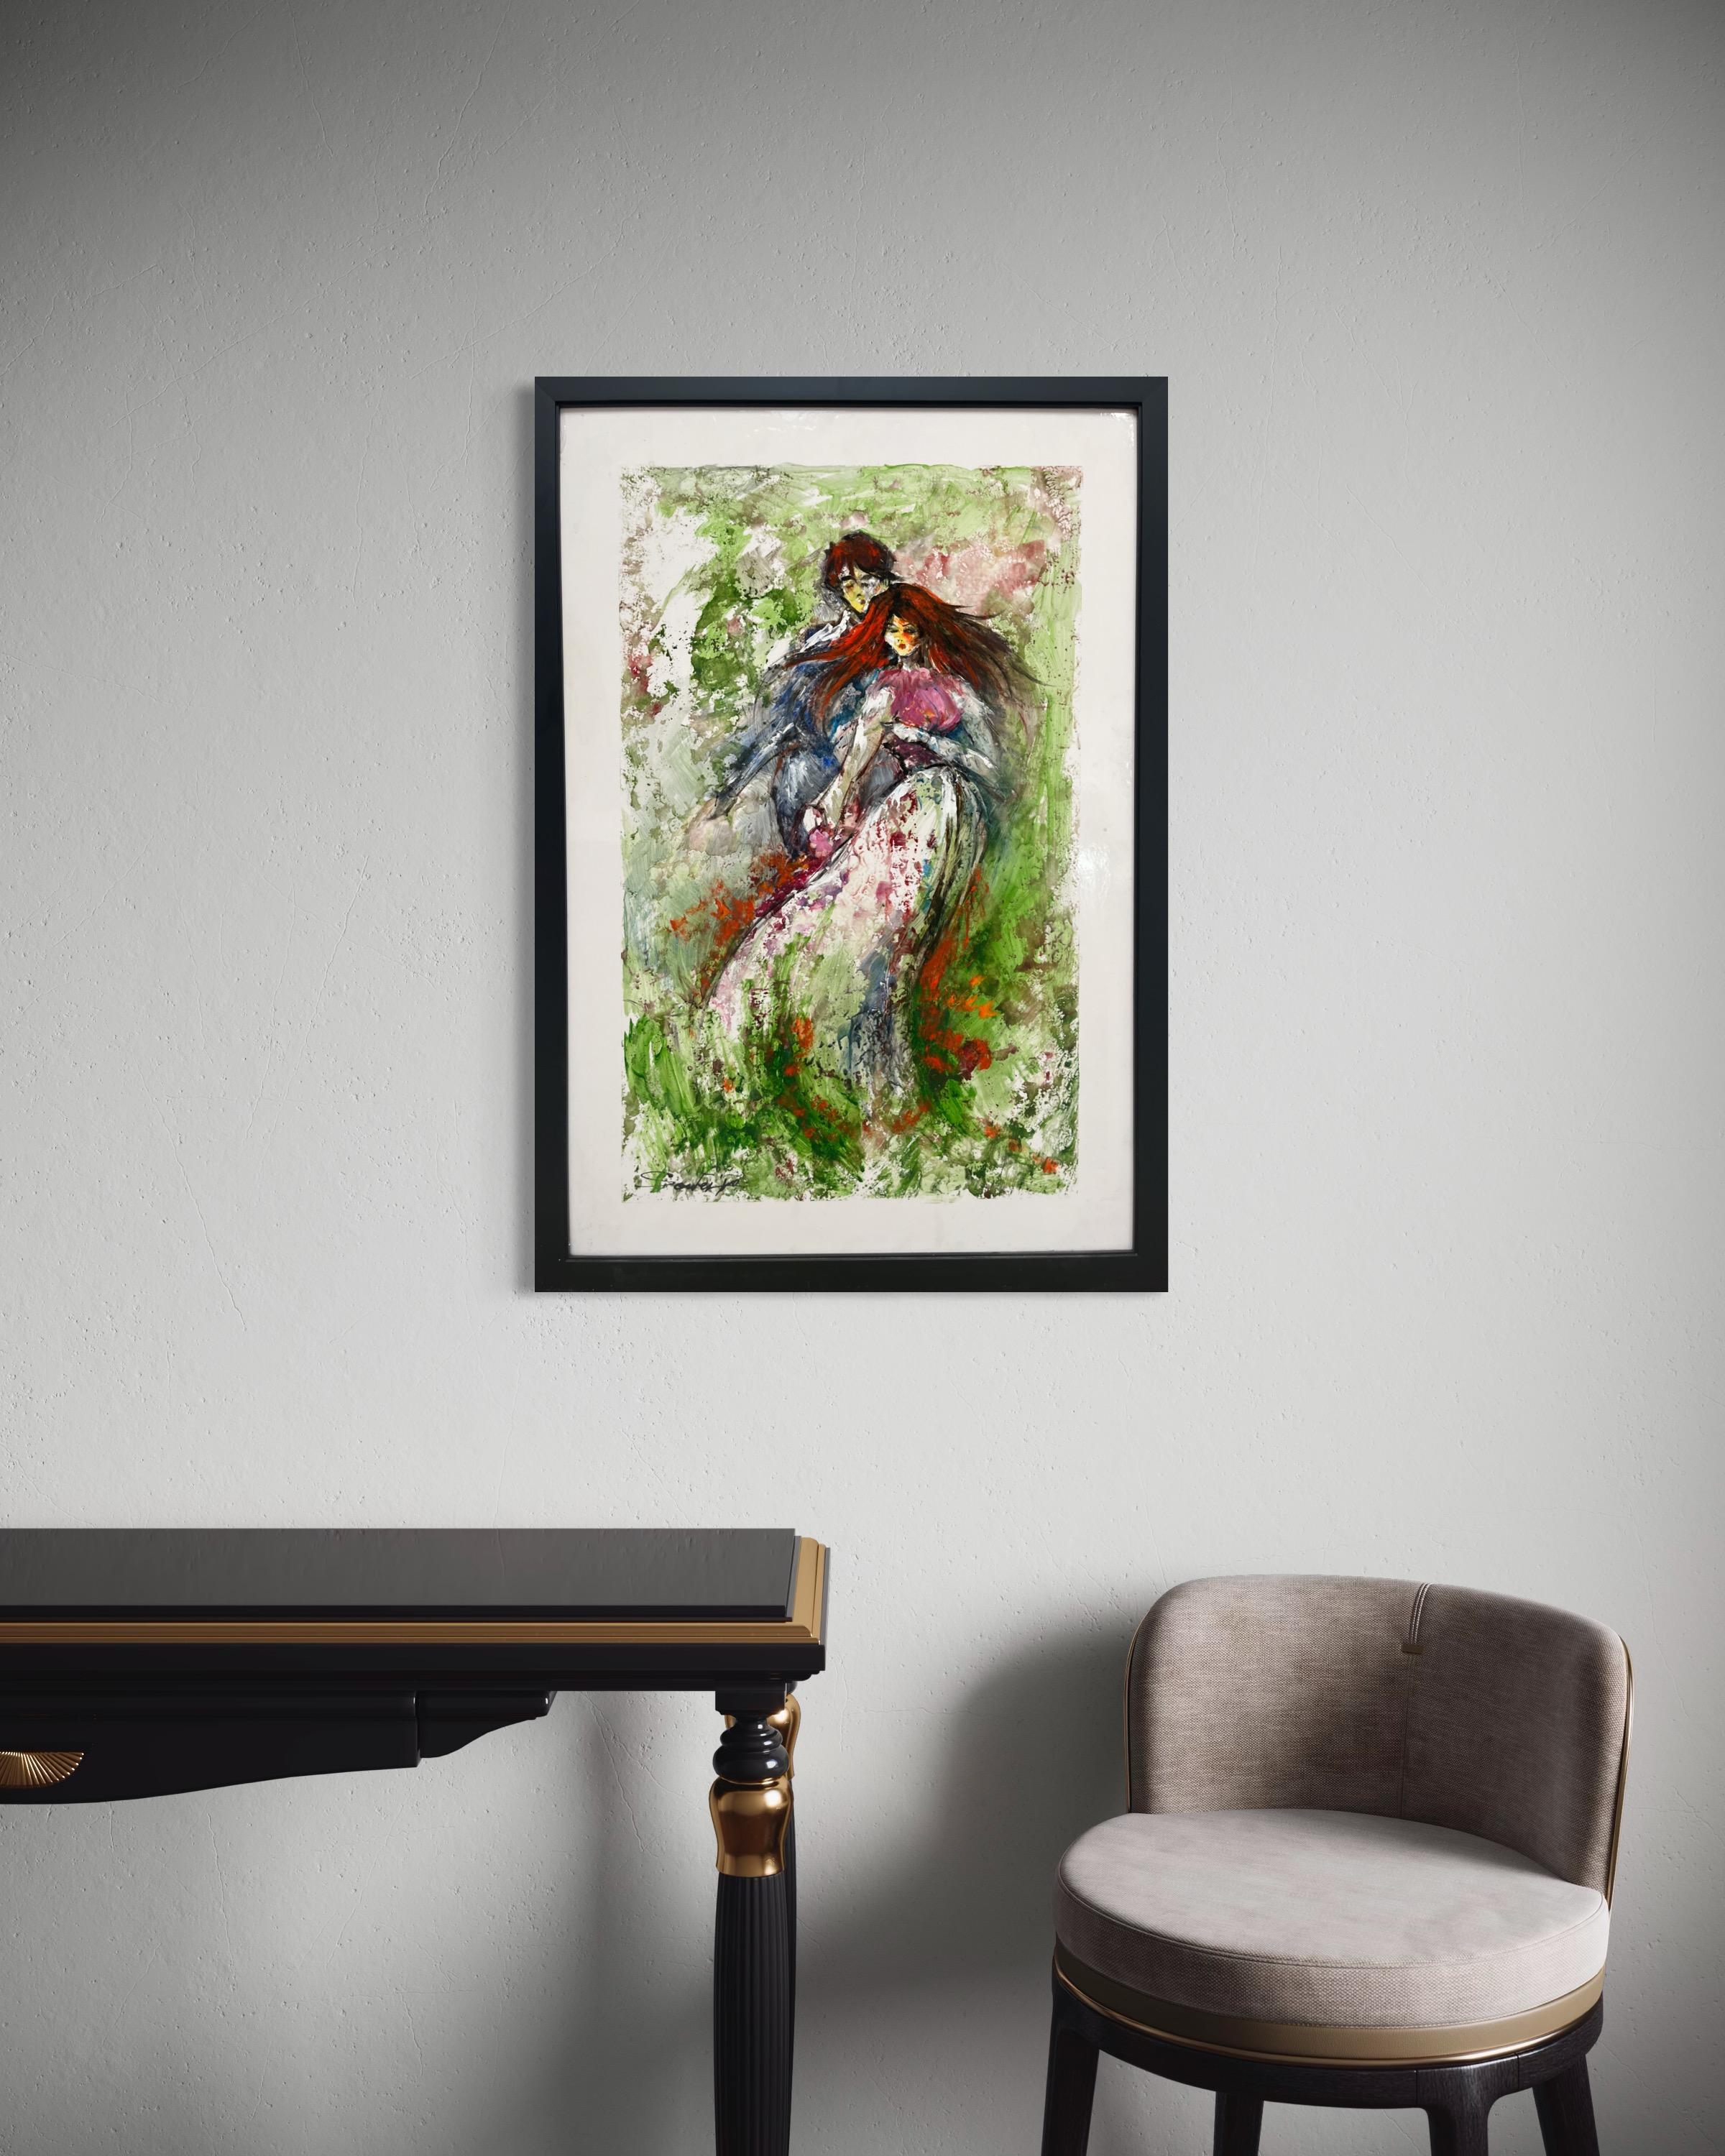 Ethereal Embrace - Framed Figurative painting - Expressionist Mixed Media Art by Jacob Souferzadeh